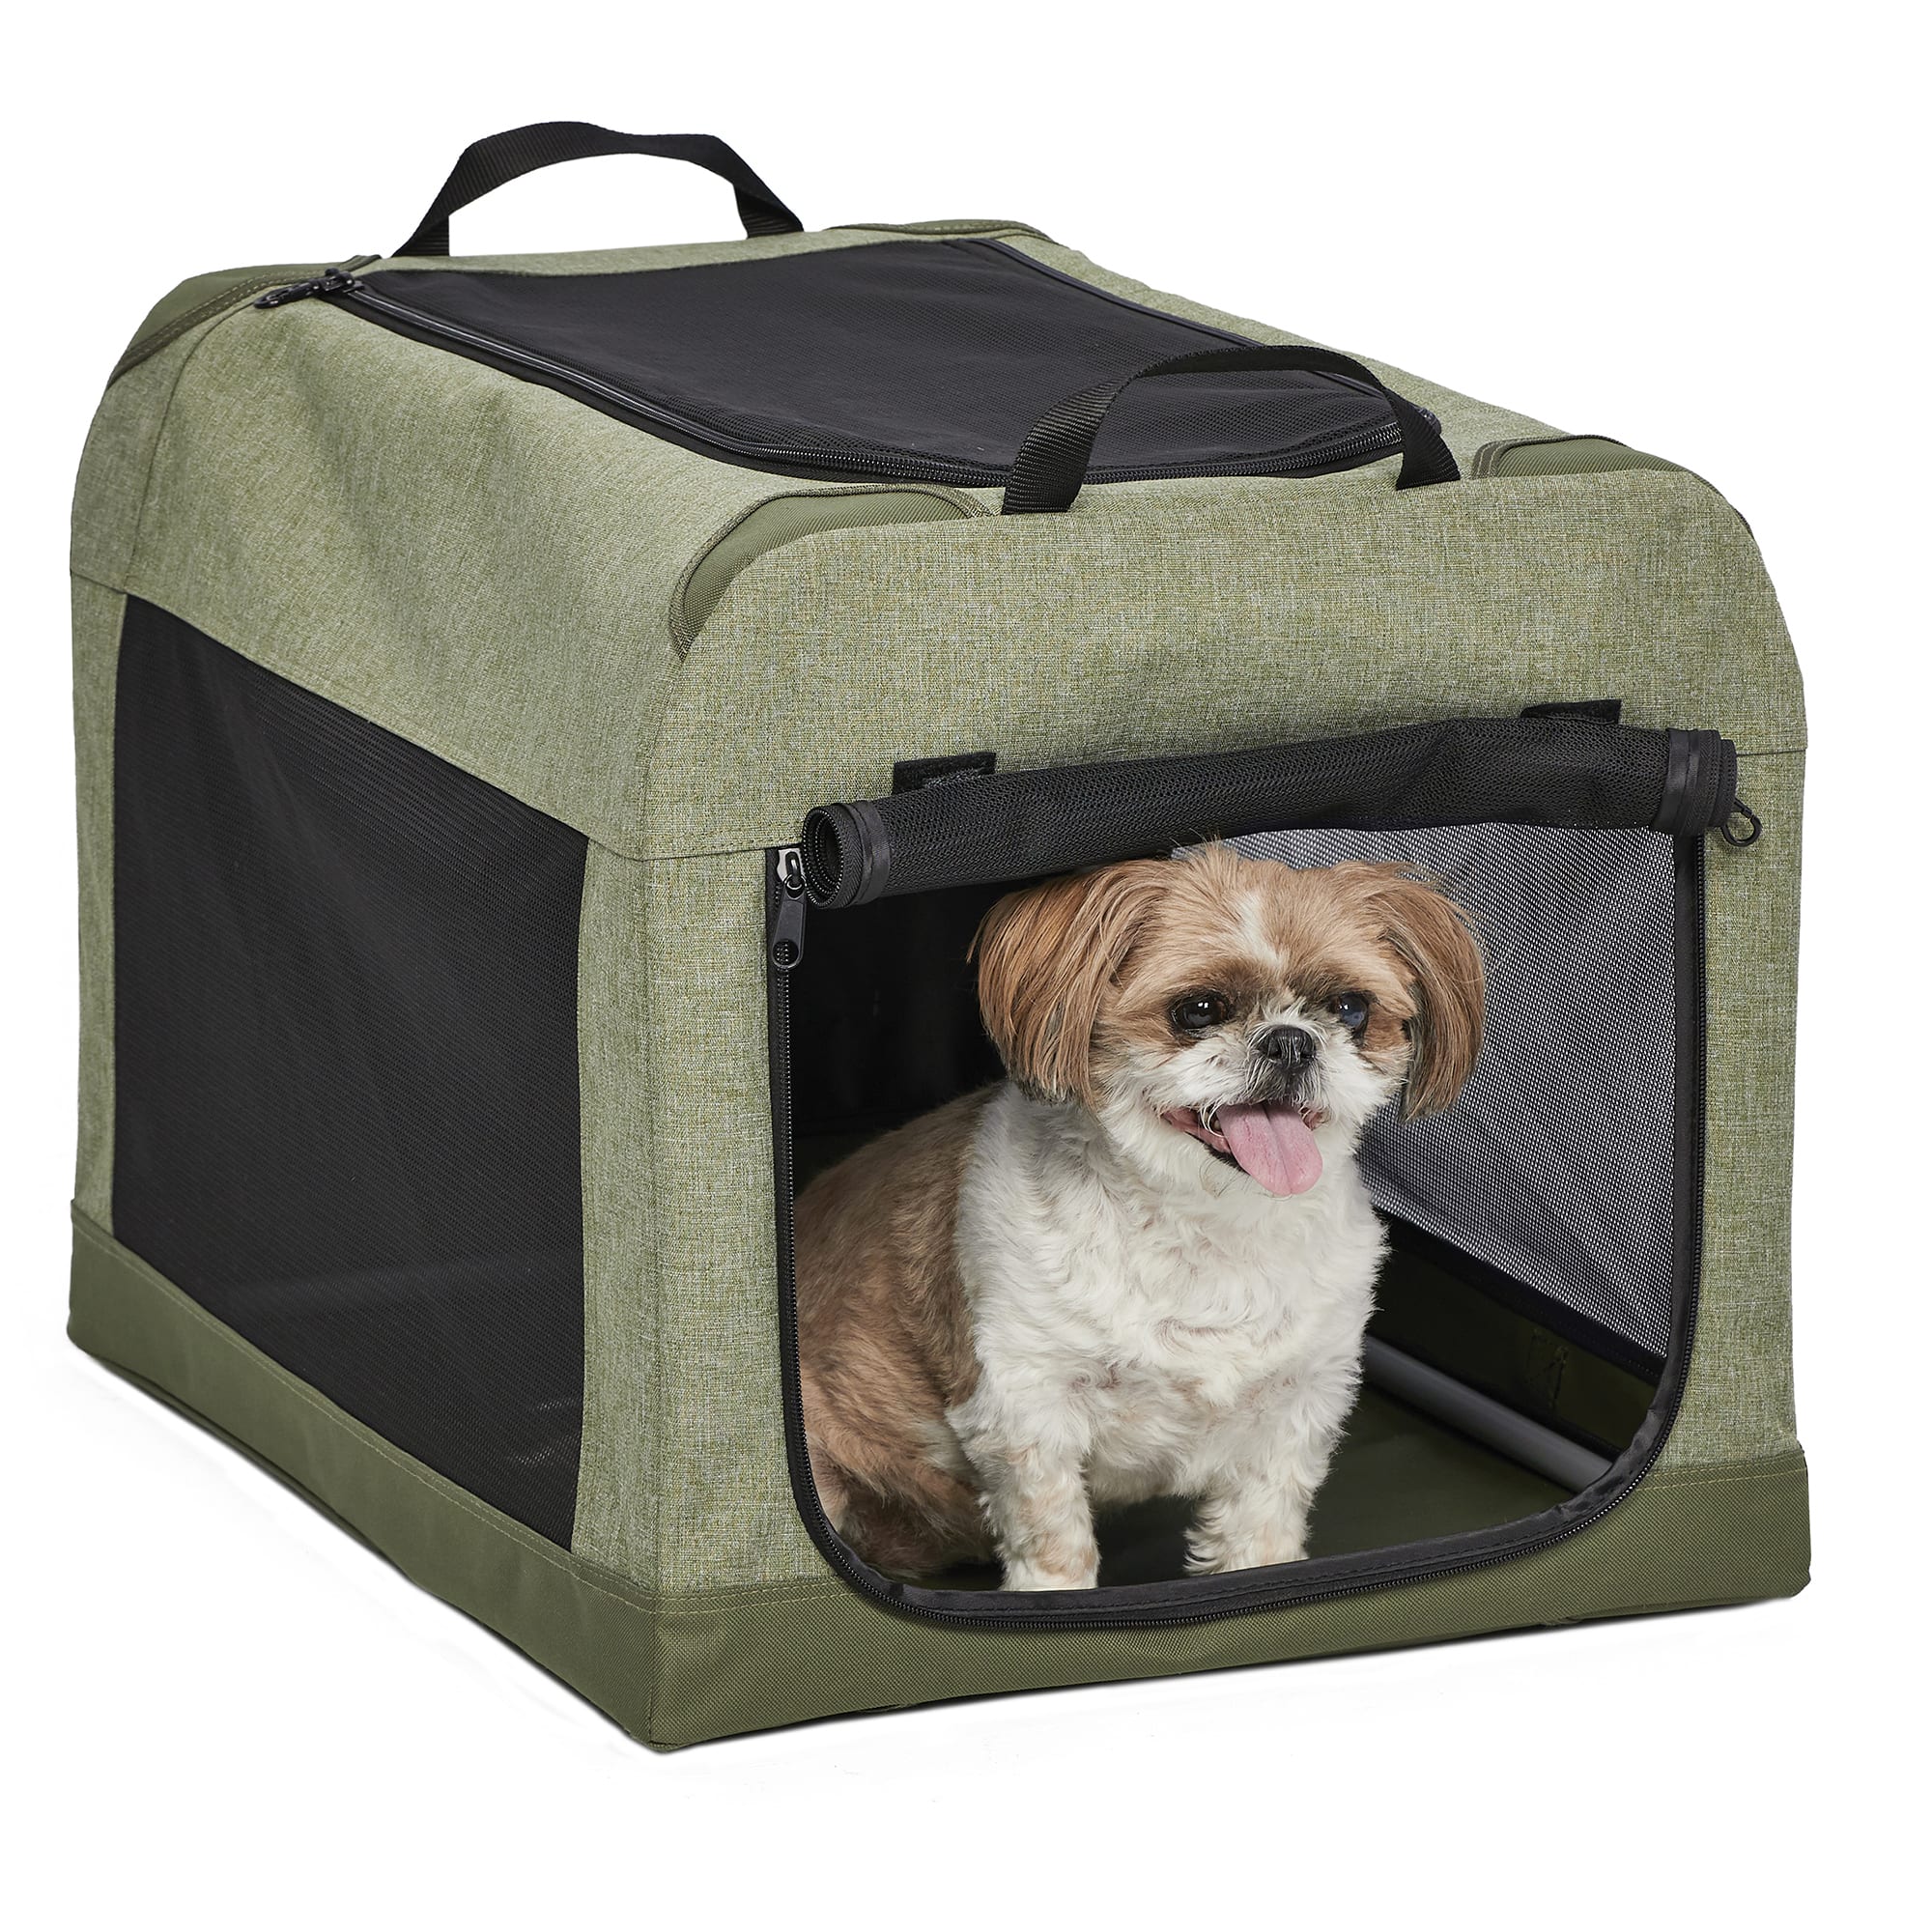 Backcountry x Petco The Foldable Dog Travel Crate - Hike & Camp